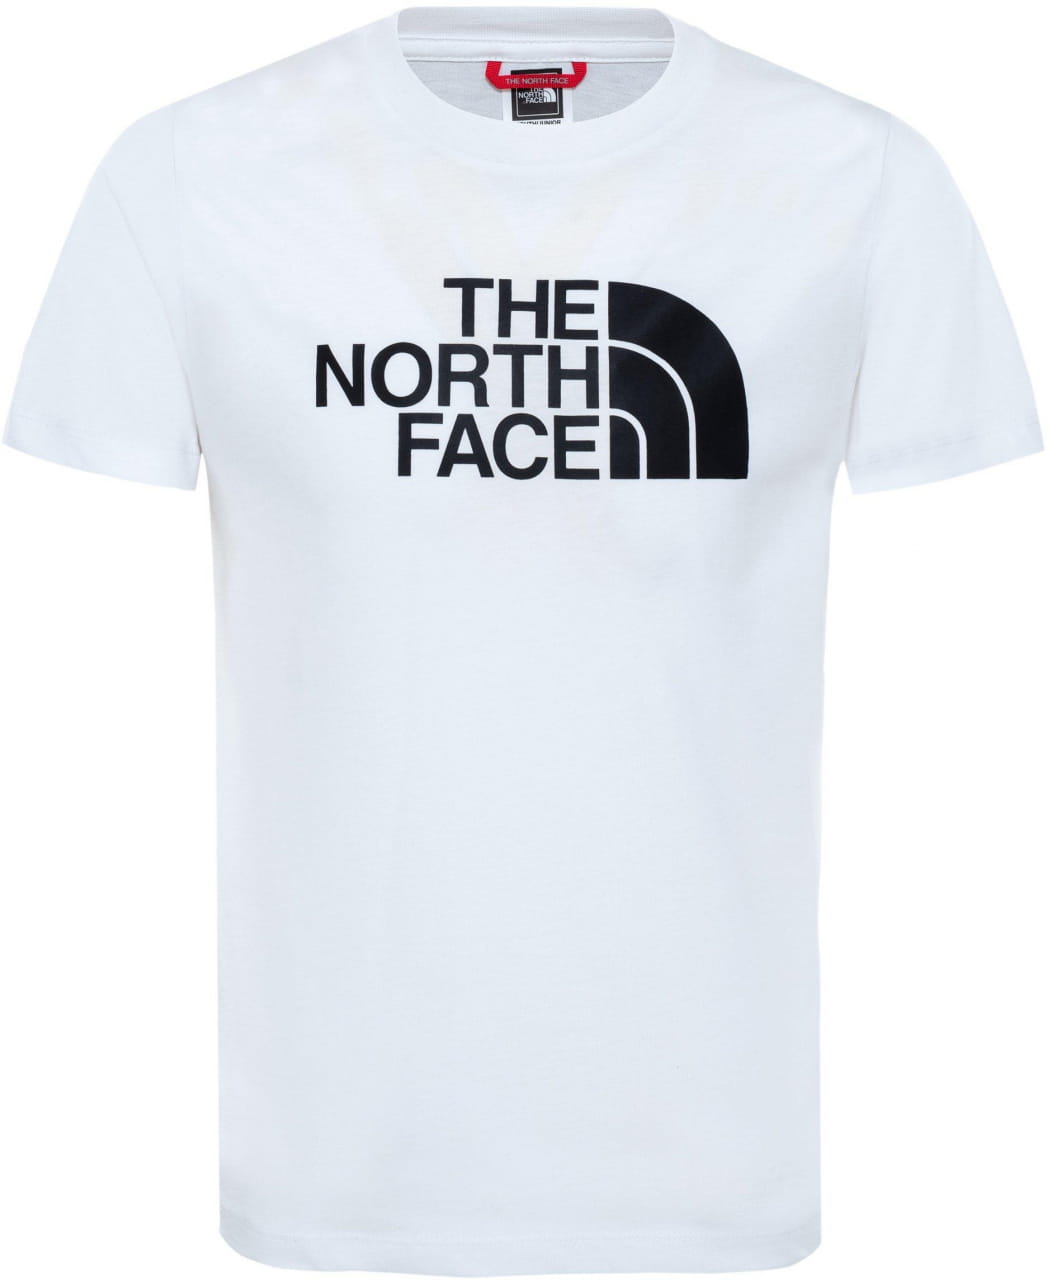 T-Shirts The North Face Youth S/S Easy Tee